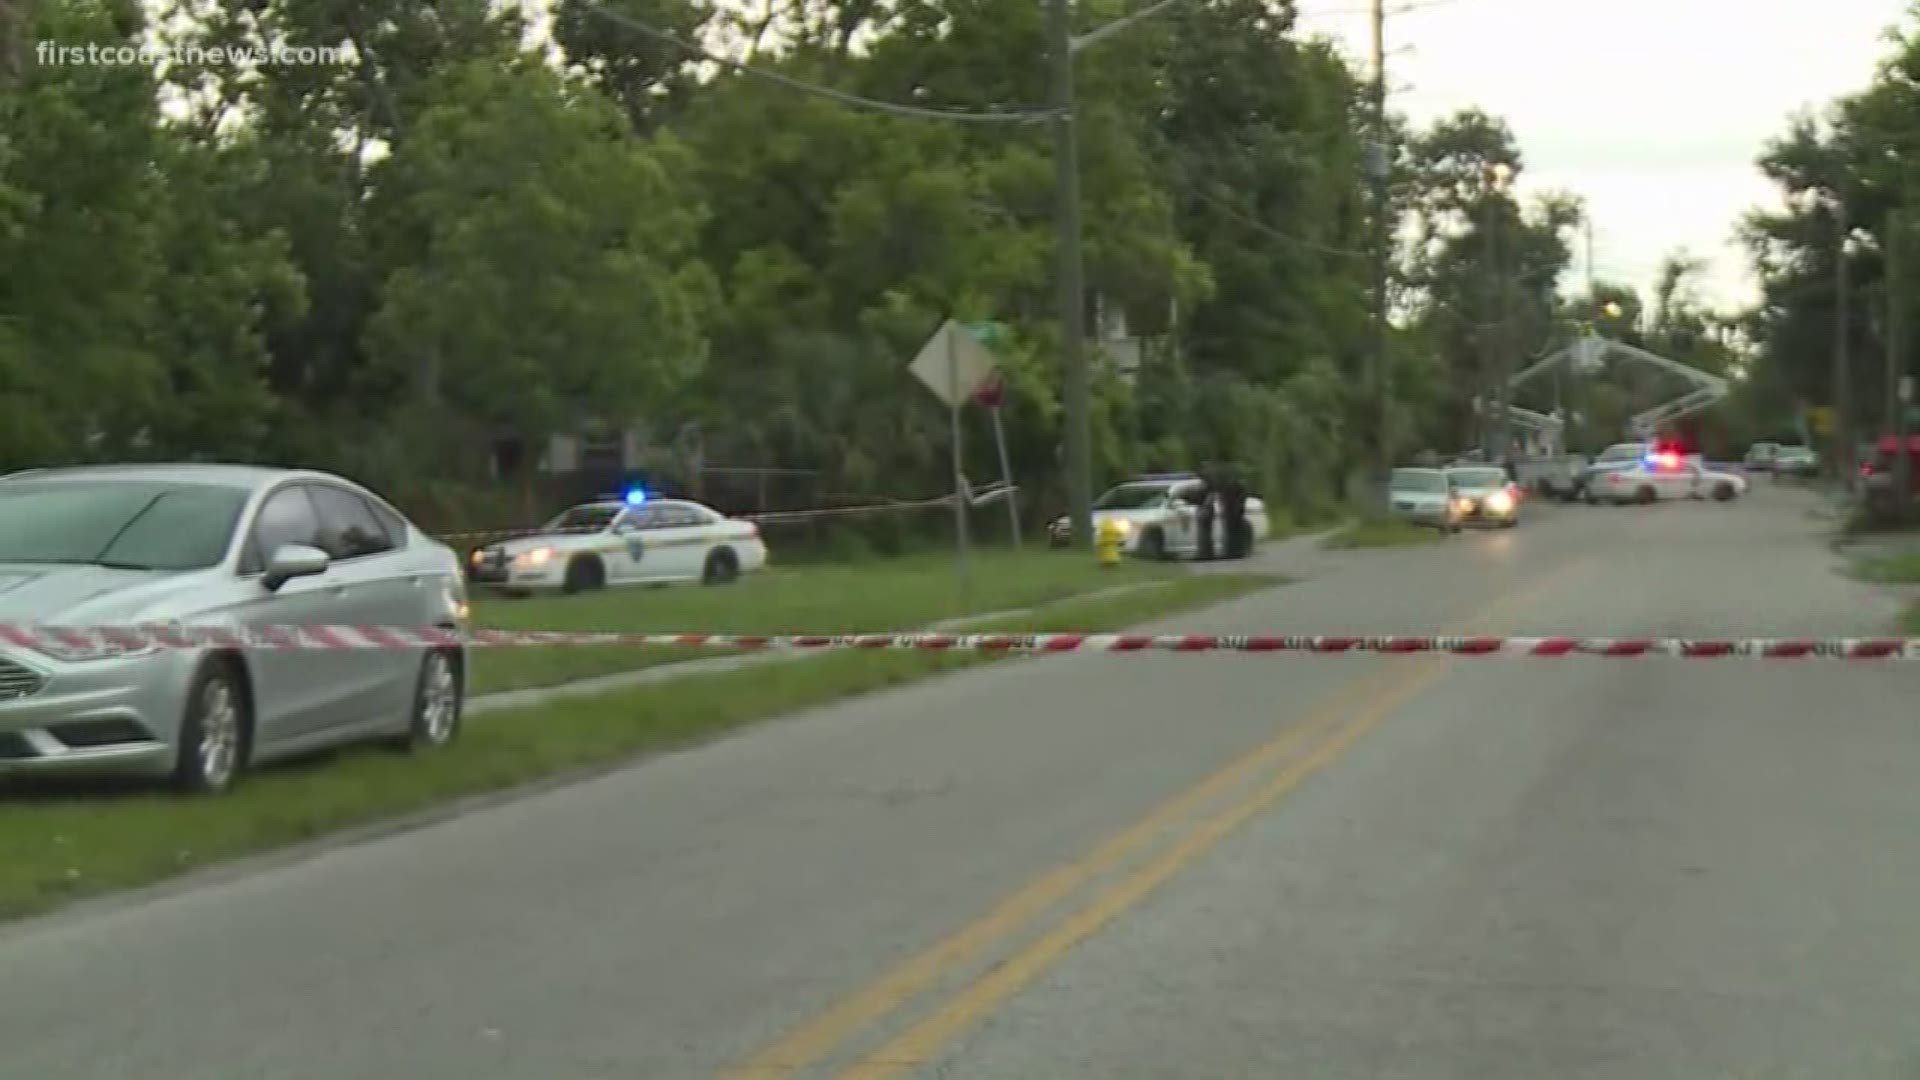 FCN's Julia Jenae breaks down these two deaths that have occurred Saturday in the Moncrief area.